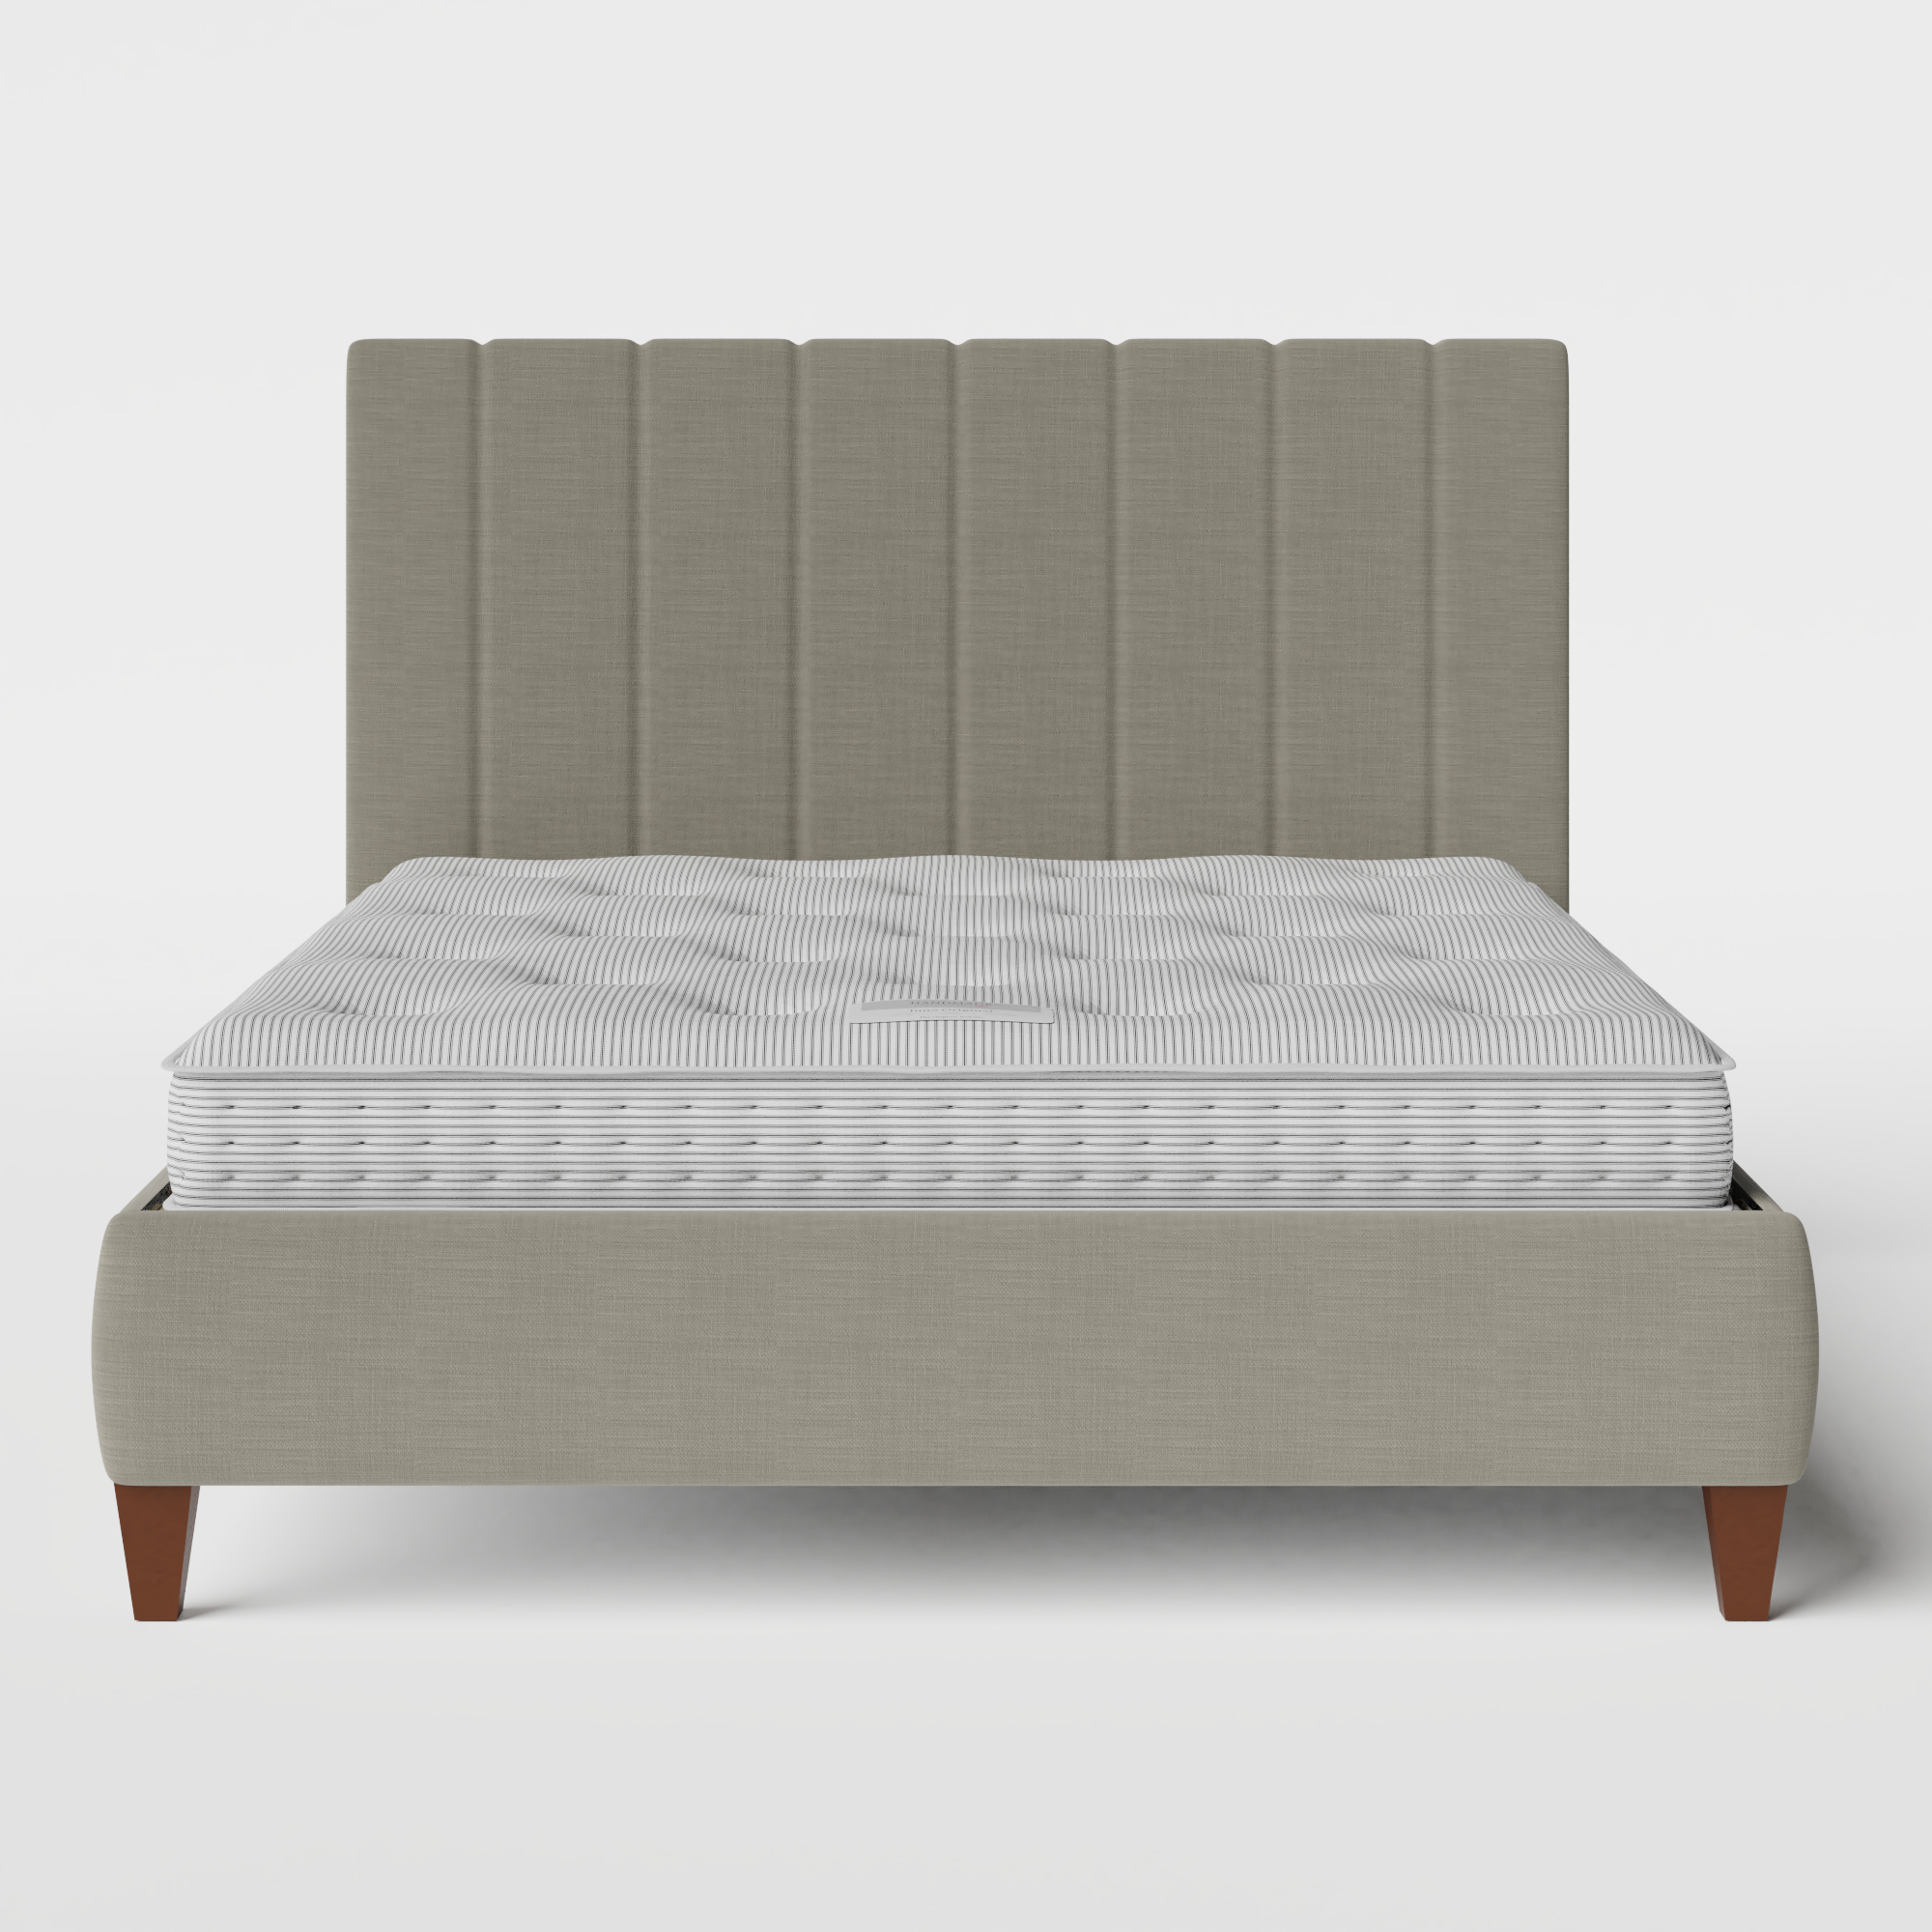 Yushan Pleated upholstered bed in grey fabric with Juno mattress